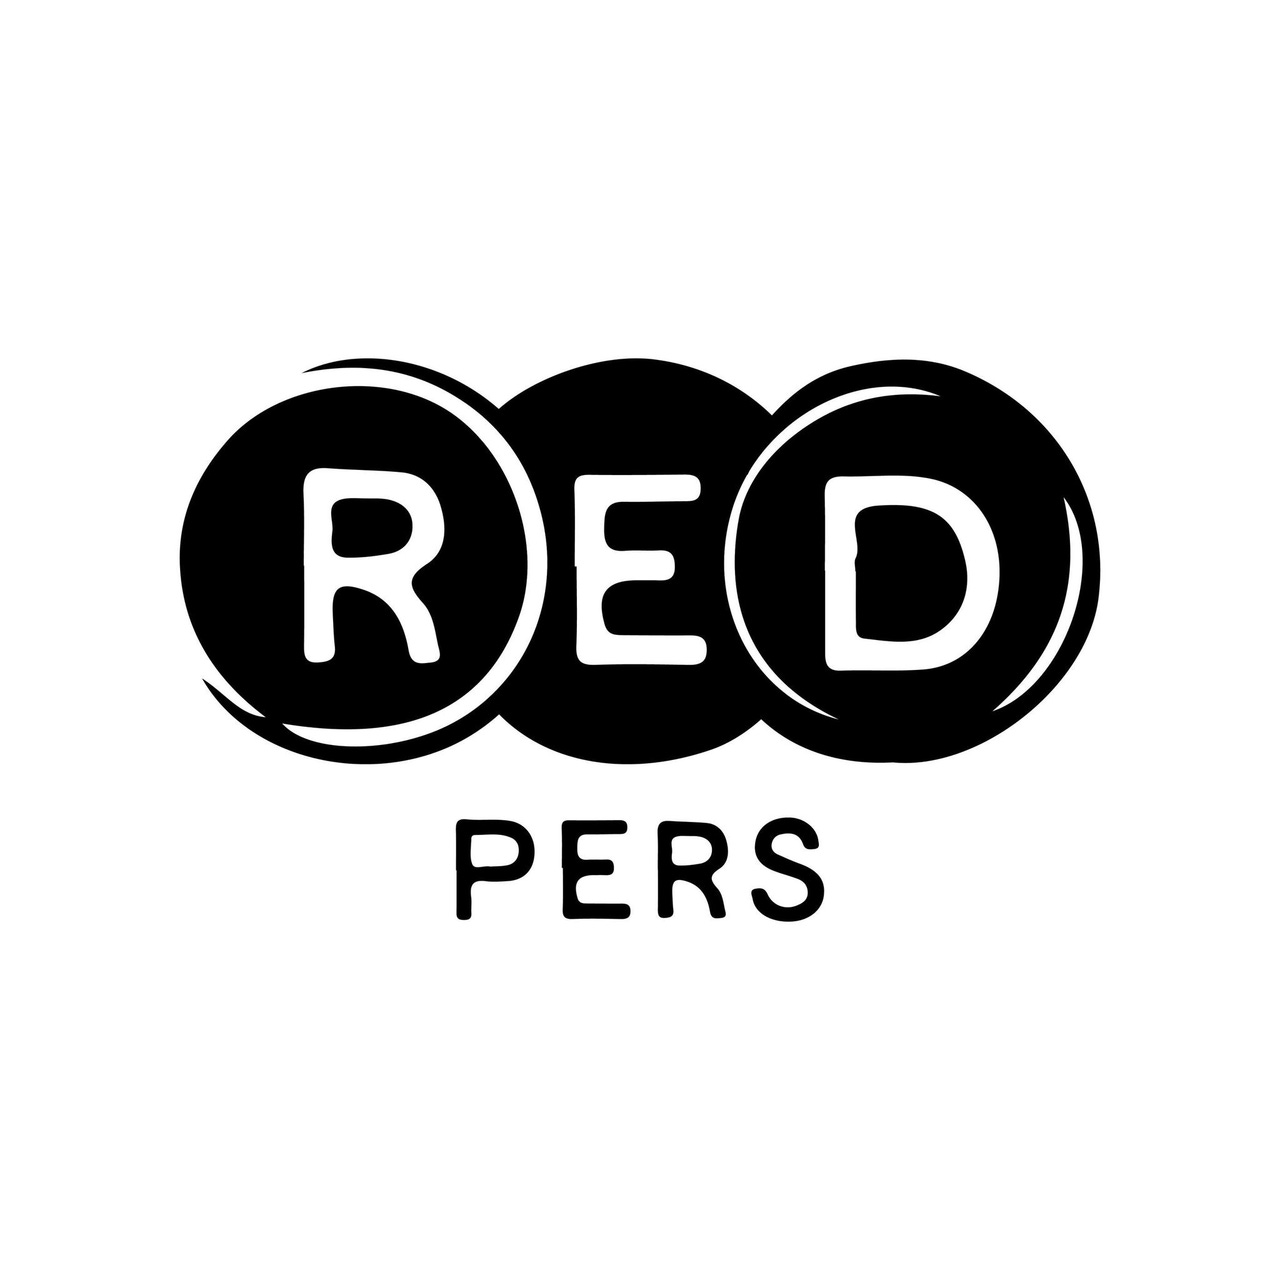 Artwork for Red Pers Nieuwsbrief